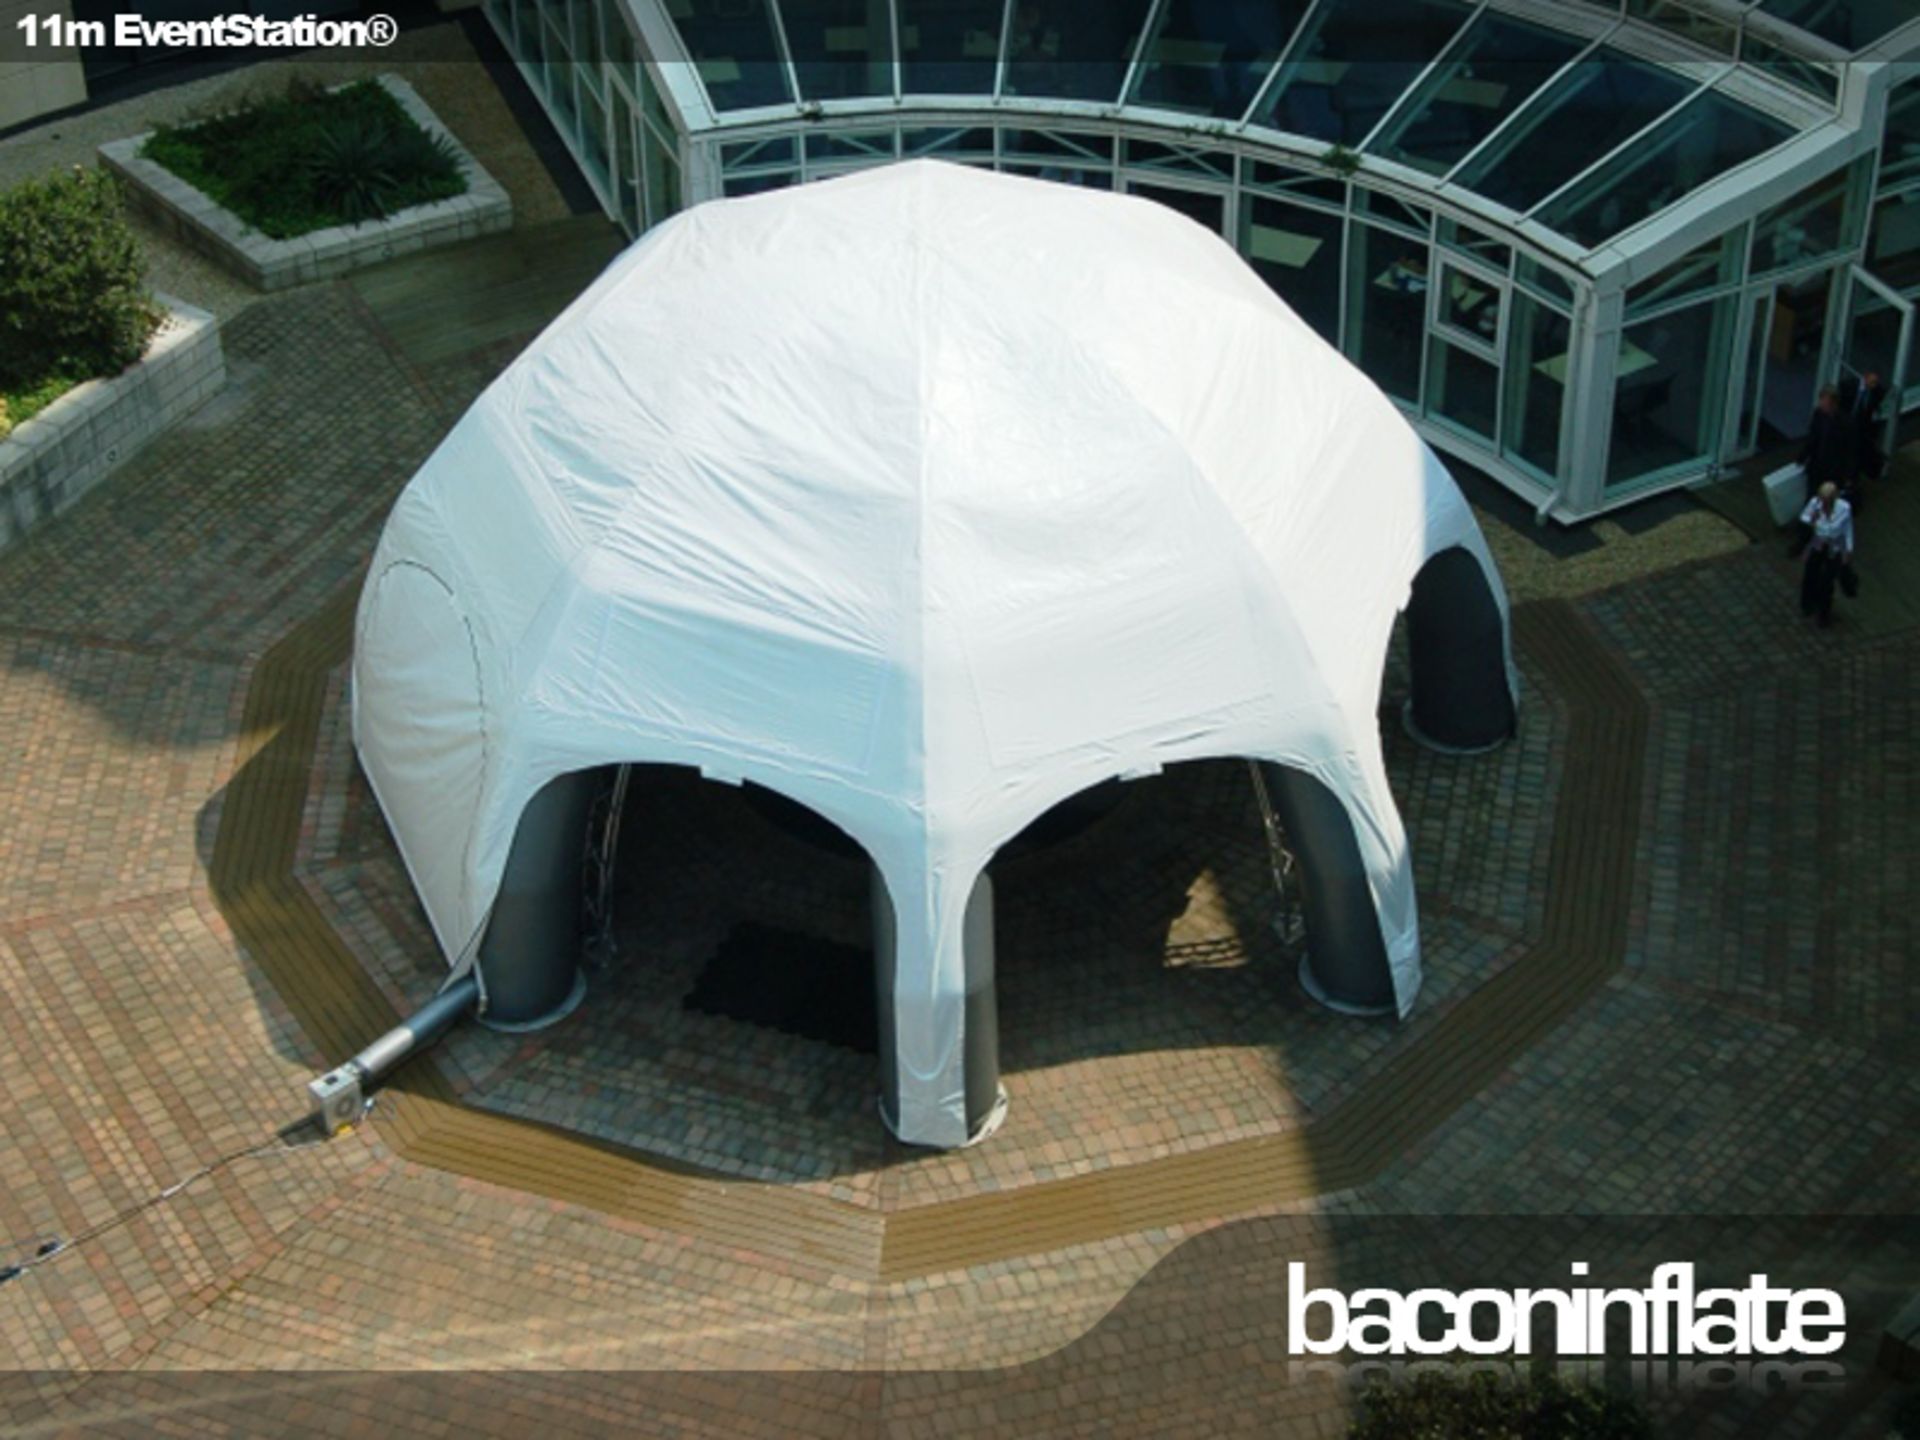 11m EventStation Leg Unit Inflatable Structure with Canopy (2 Bags) (Stock No’s; BiES & BiES 11/ - Image 3 of 12